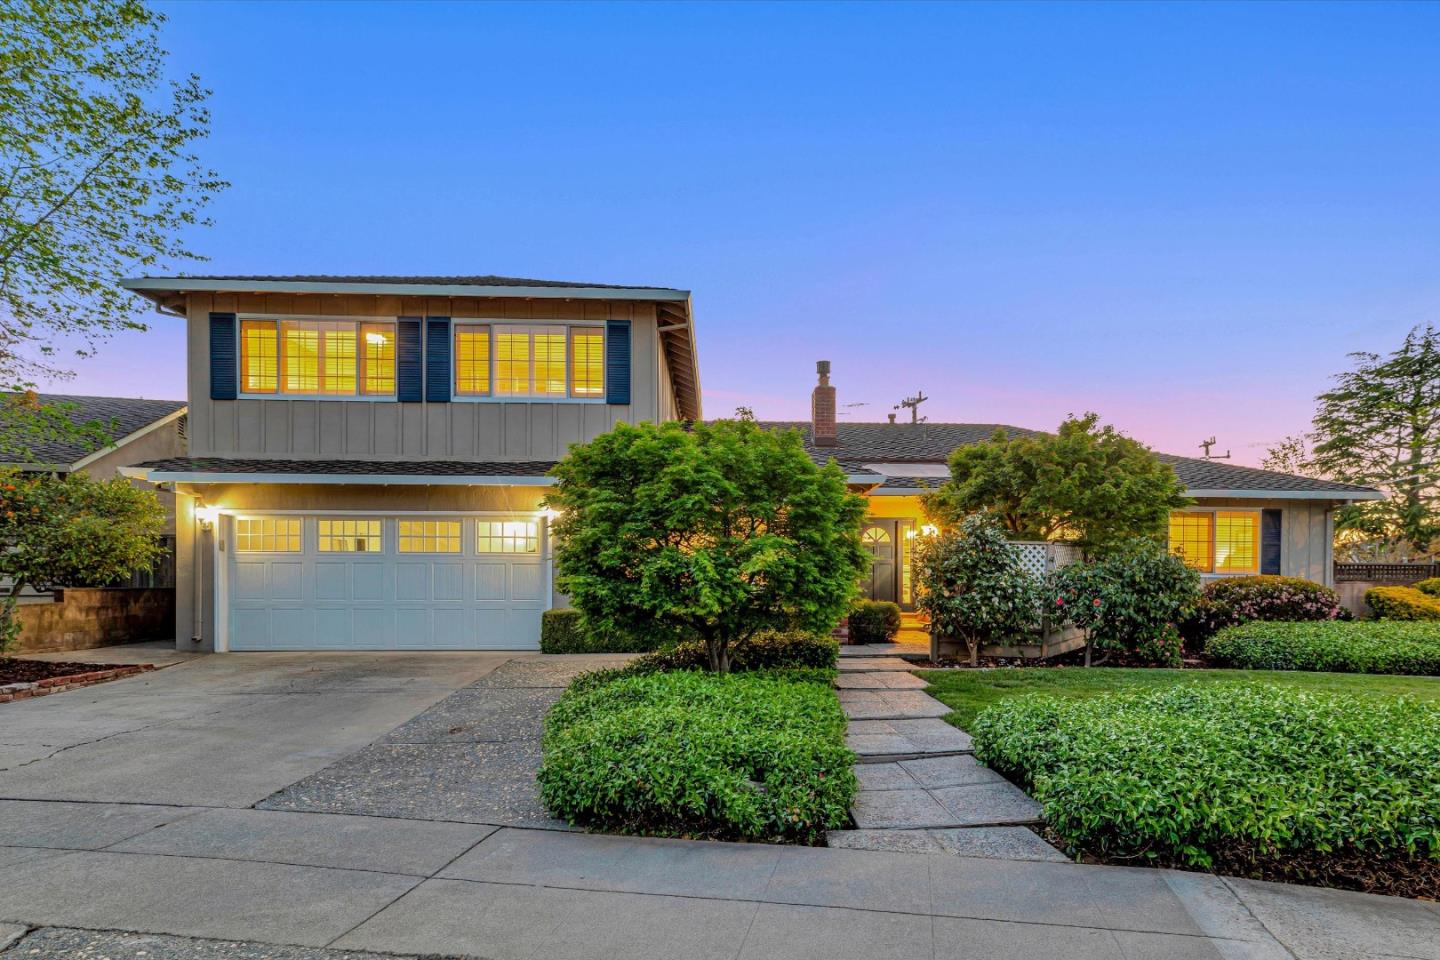 Photo of 5451 Blossom Wood Dr in San Jose, CA